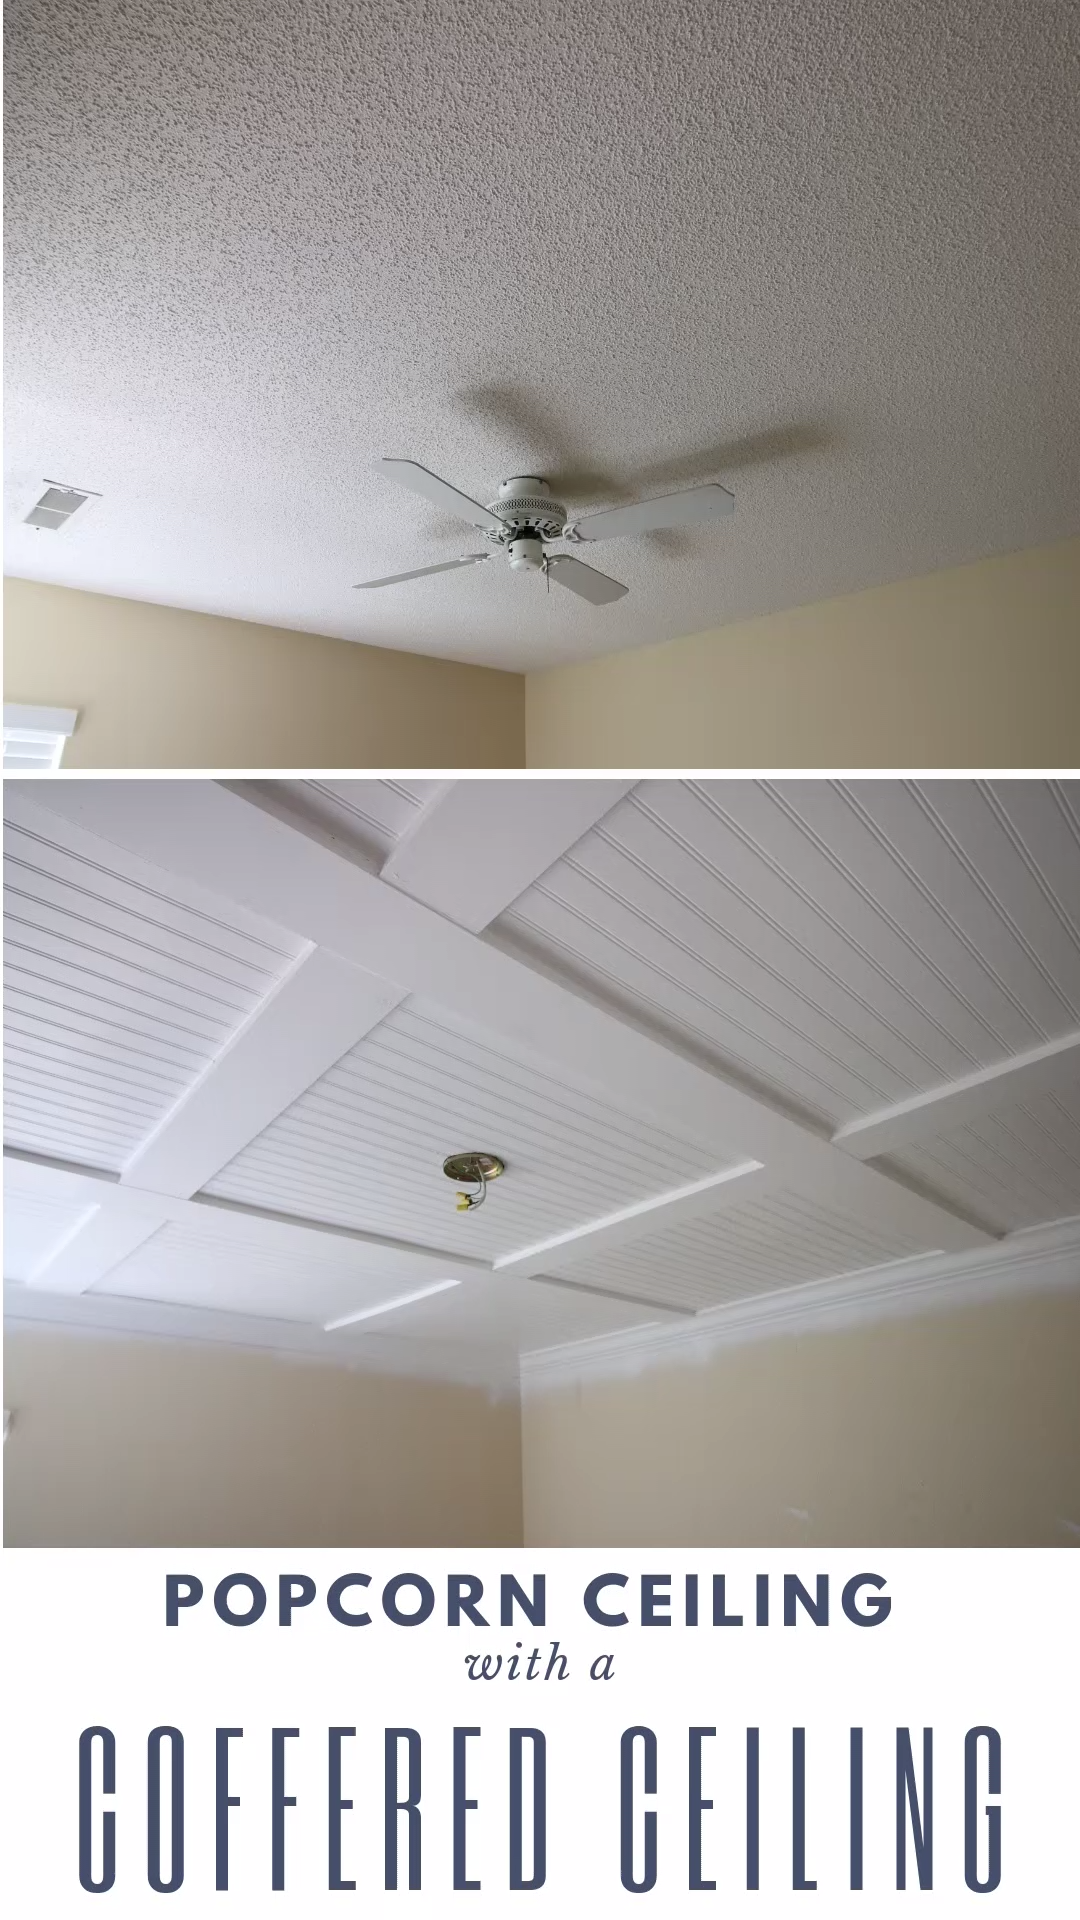 Cover a popcorn ceiling with a coffered ceiling - Cover a popcorn ceiling with a coffered ceiling -   diy Room renovation